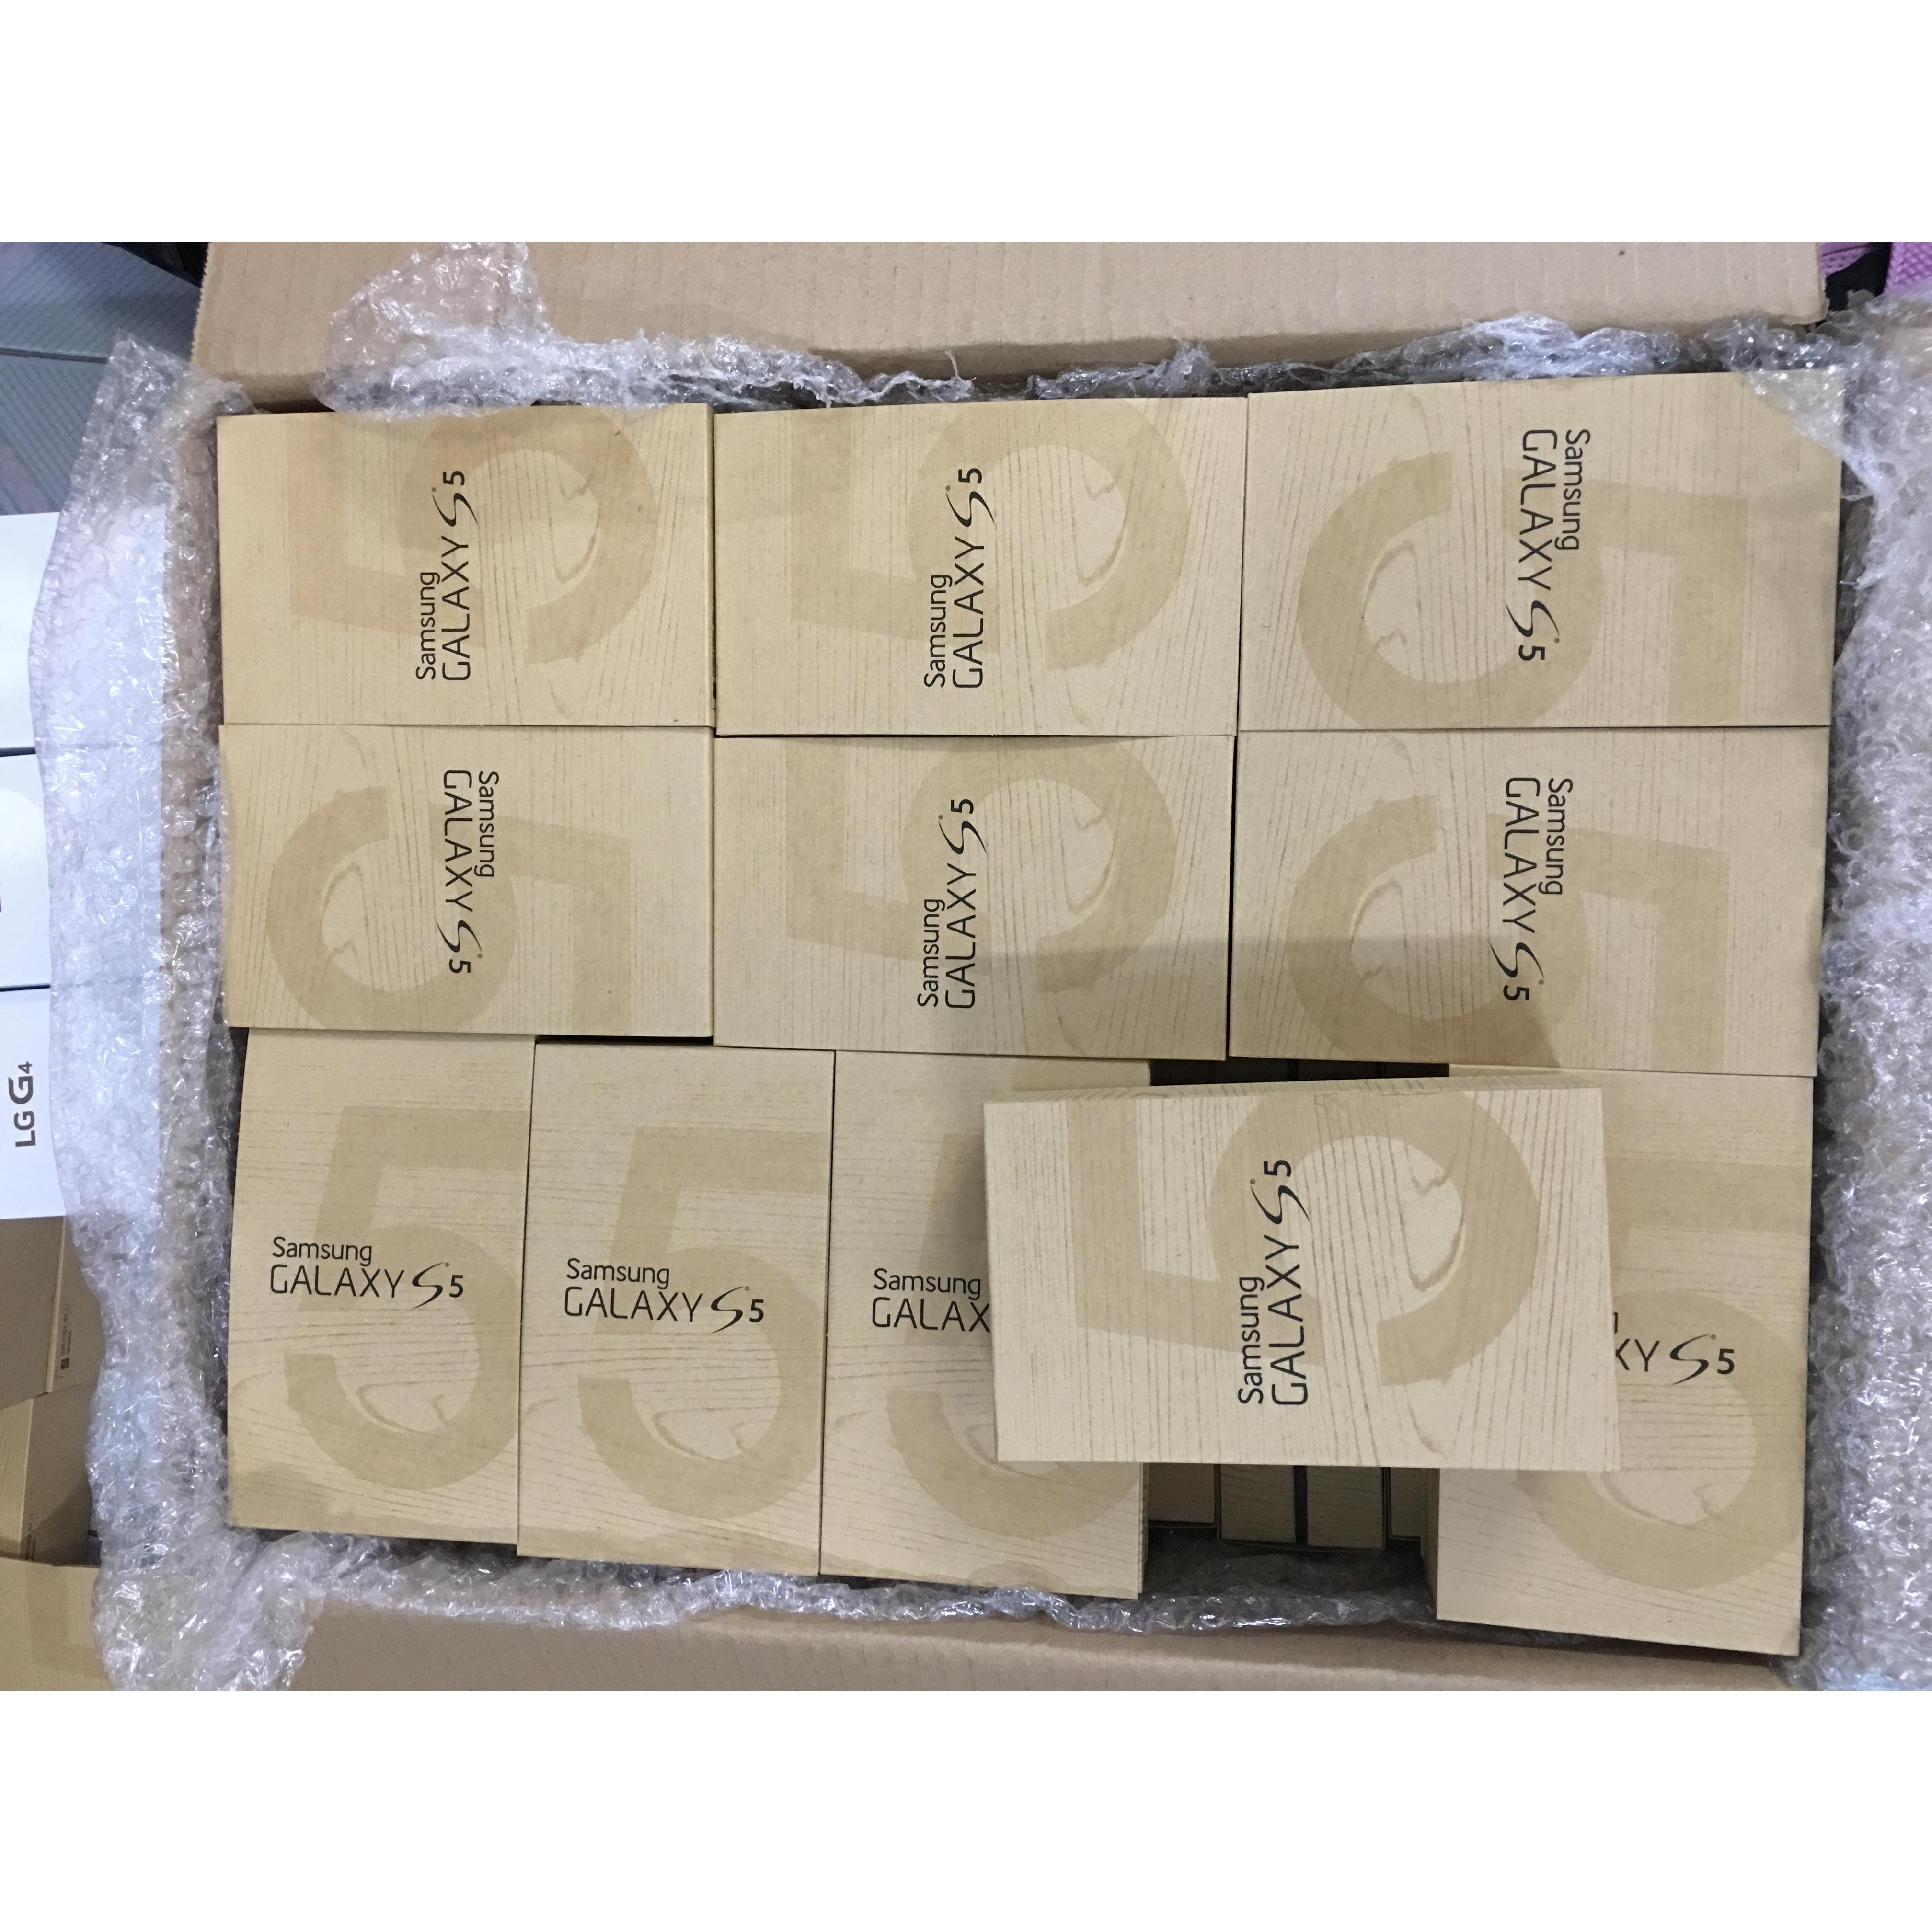 Samsung Samsung S5 Boxes Wholesale Suppliers